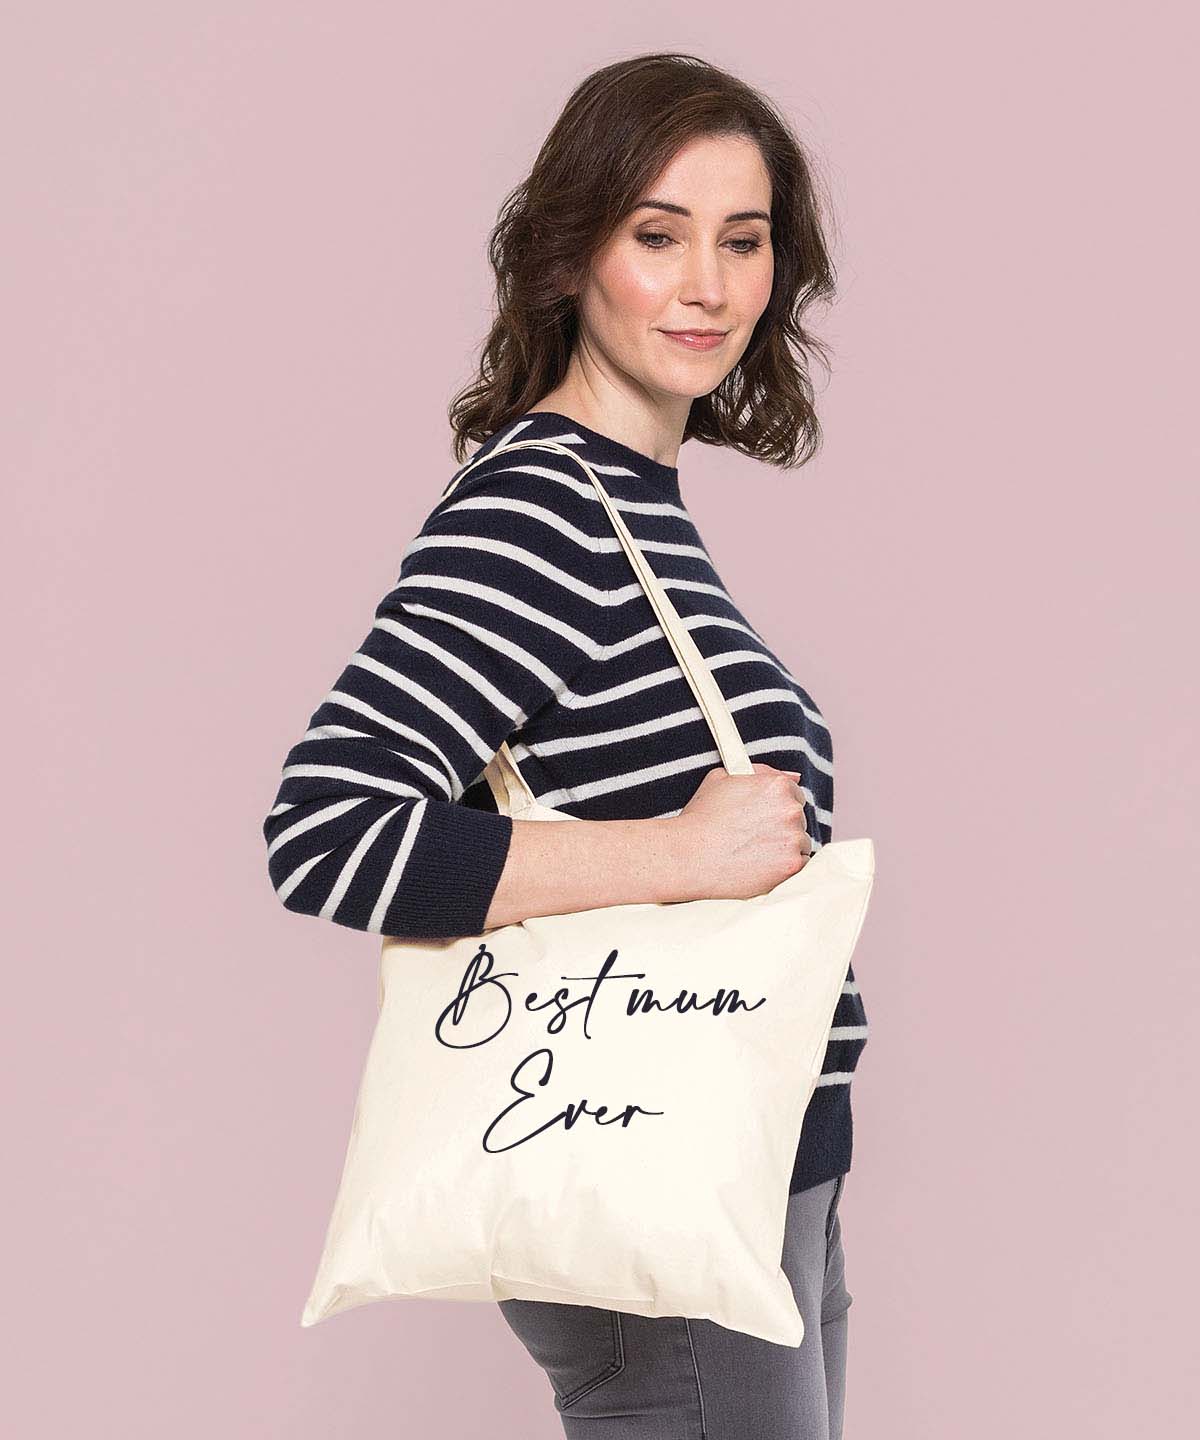 Personalised Shopping Bags | Design Your Custom Shopping Bag